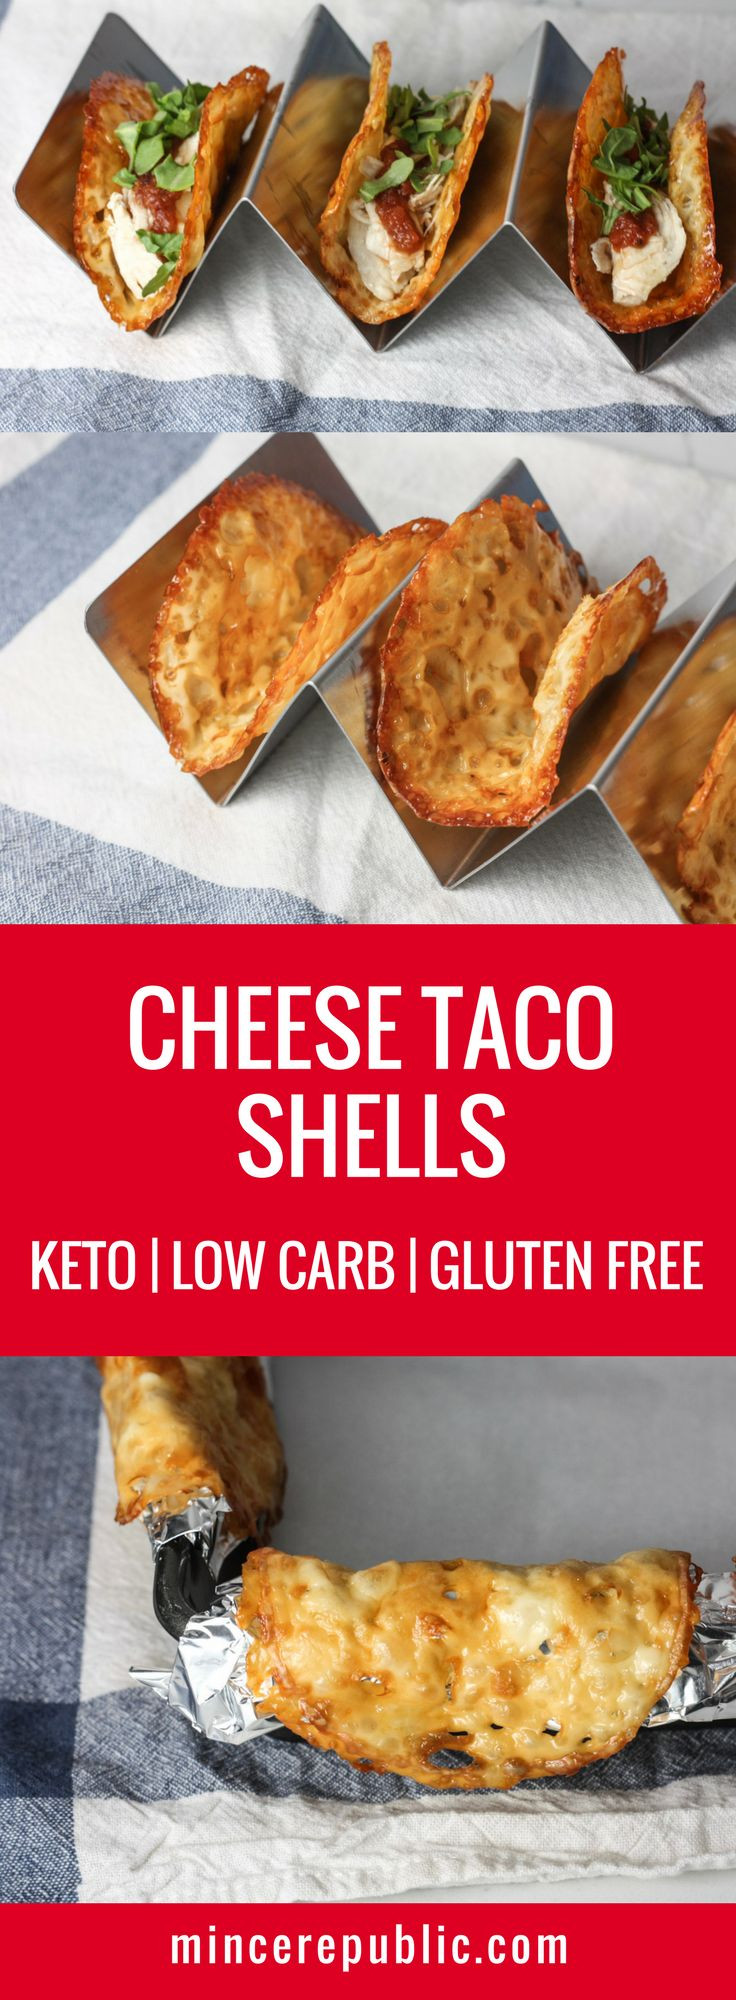 Low Carb Dairy Free Recipes
 Best 25 Keto foods ideas on Pinterest